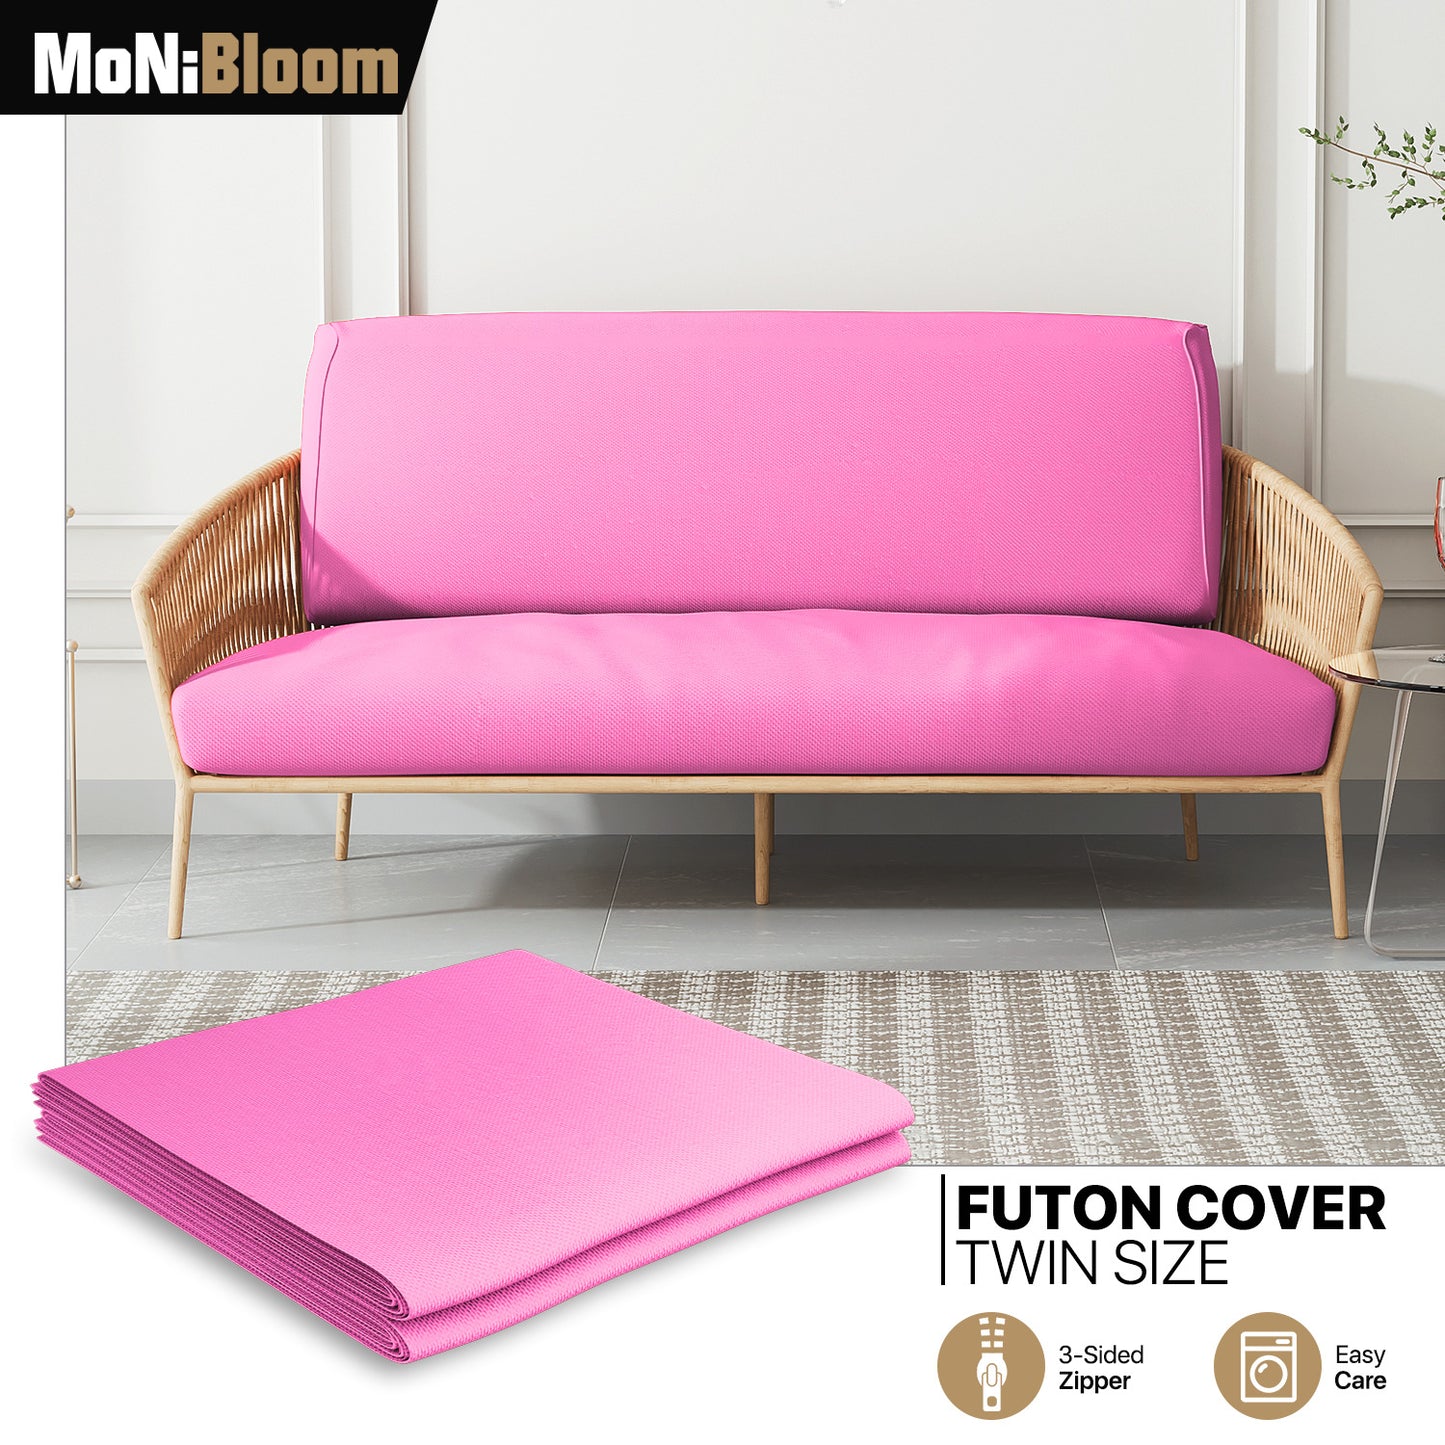 Futon Cover - Polyester - Twin Size 39"x75"x2"